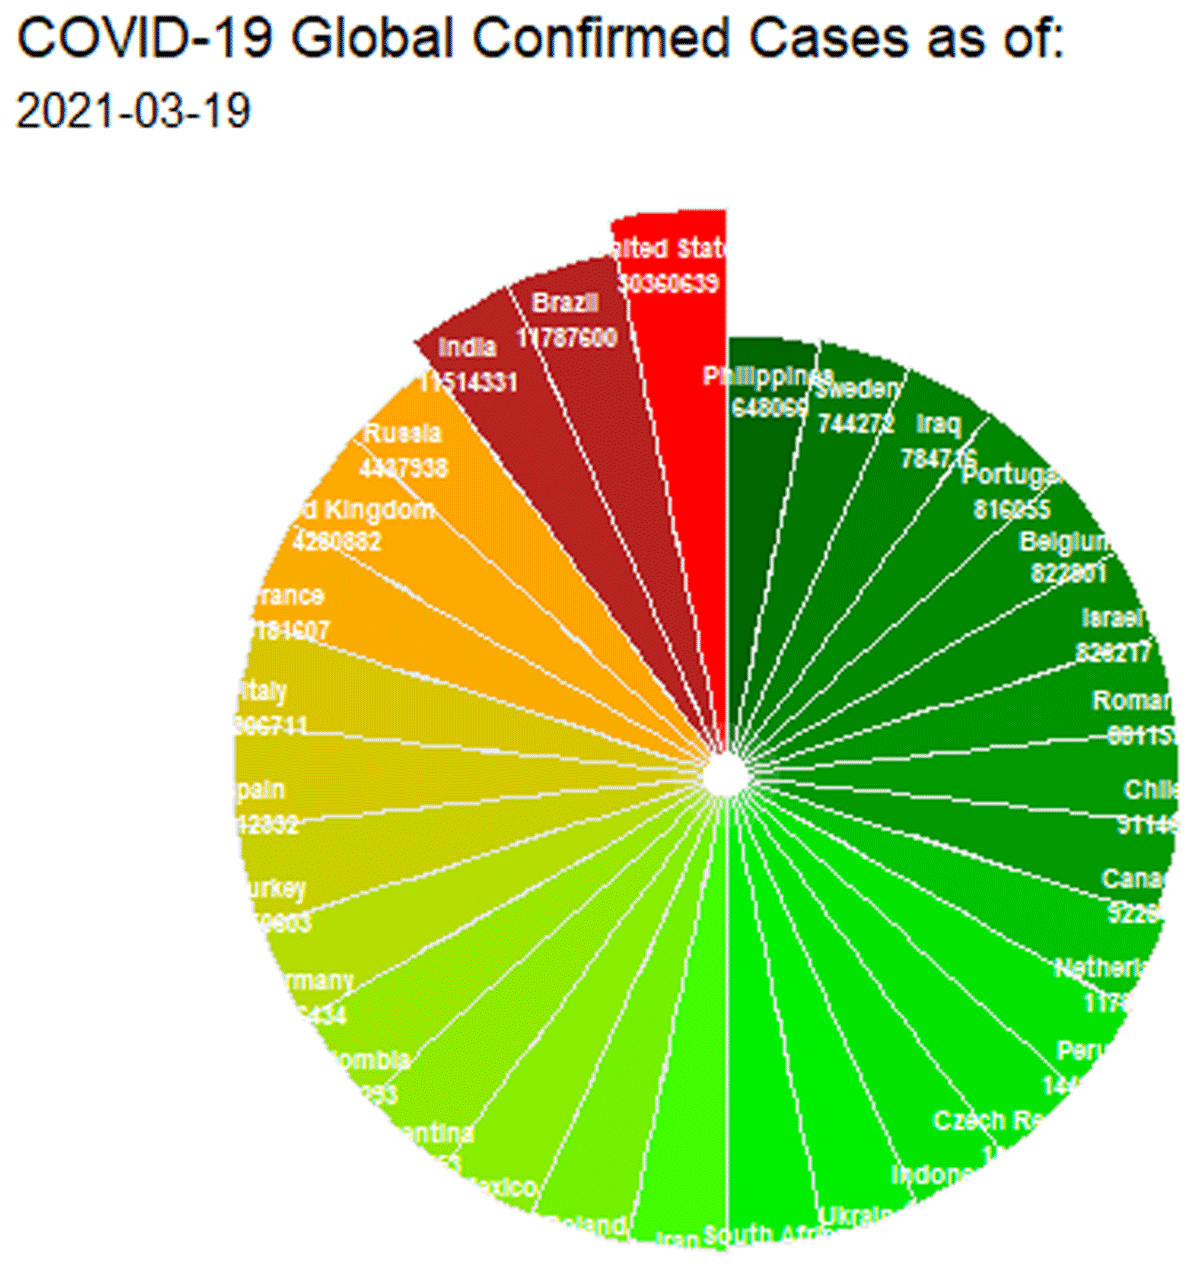 Global confirmed cases by country using a wind rose (author generated)